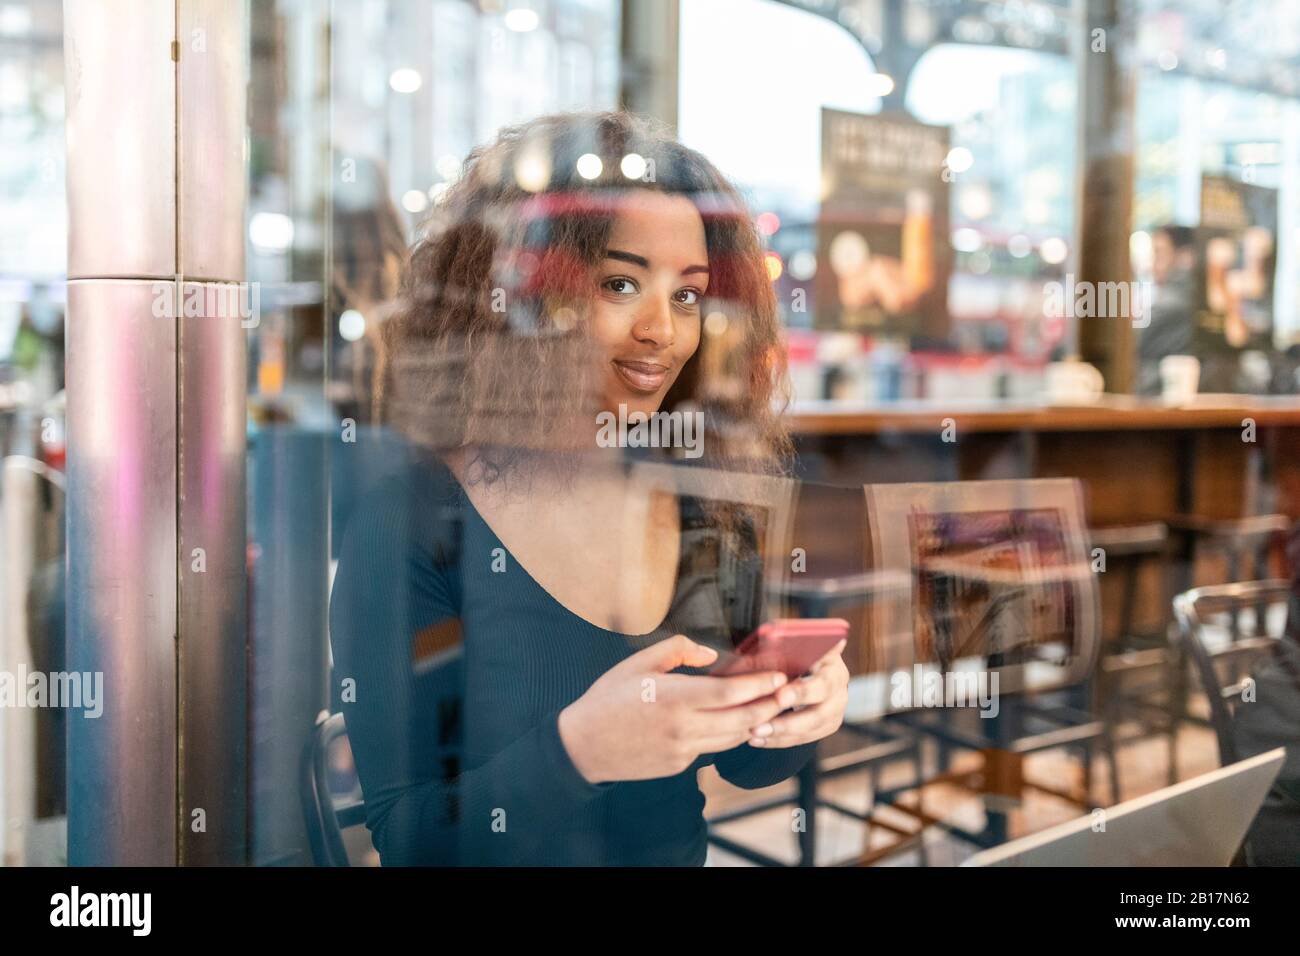 Portrait of smiling young woman using smartphone in a cafe Stock Photo